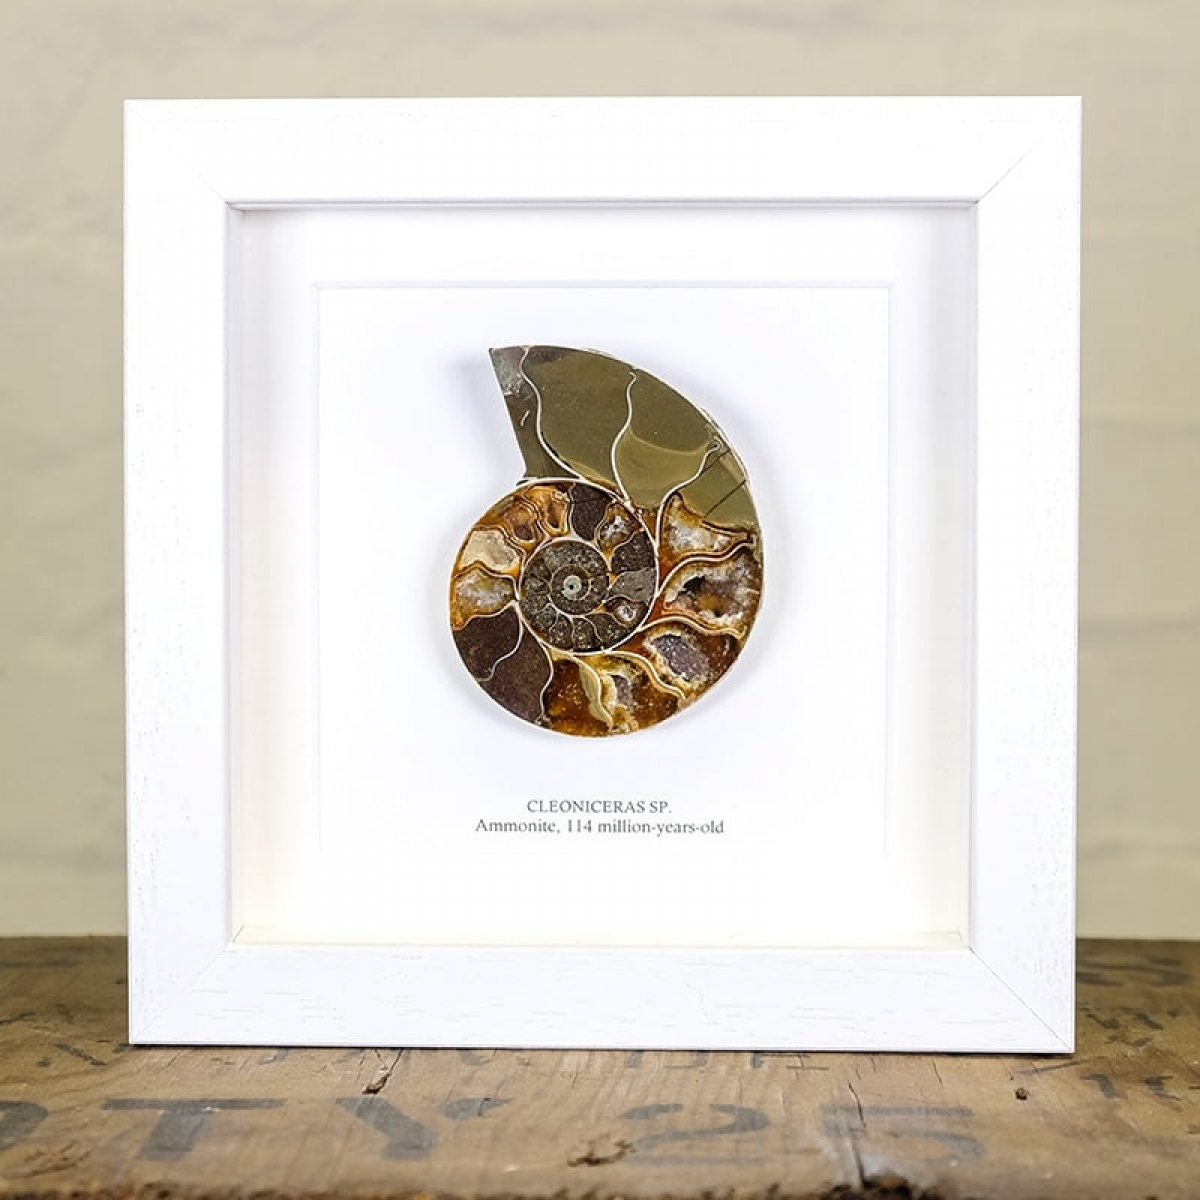 Ammonite Cut and Polished Fossil in Box Frame (Cleoniceras sp) - Specimen #02